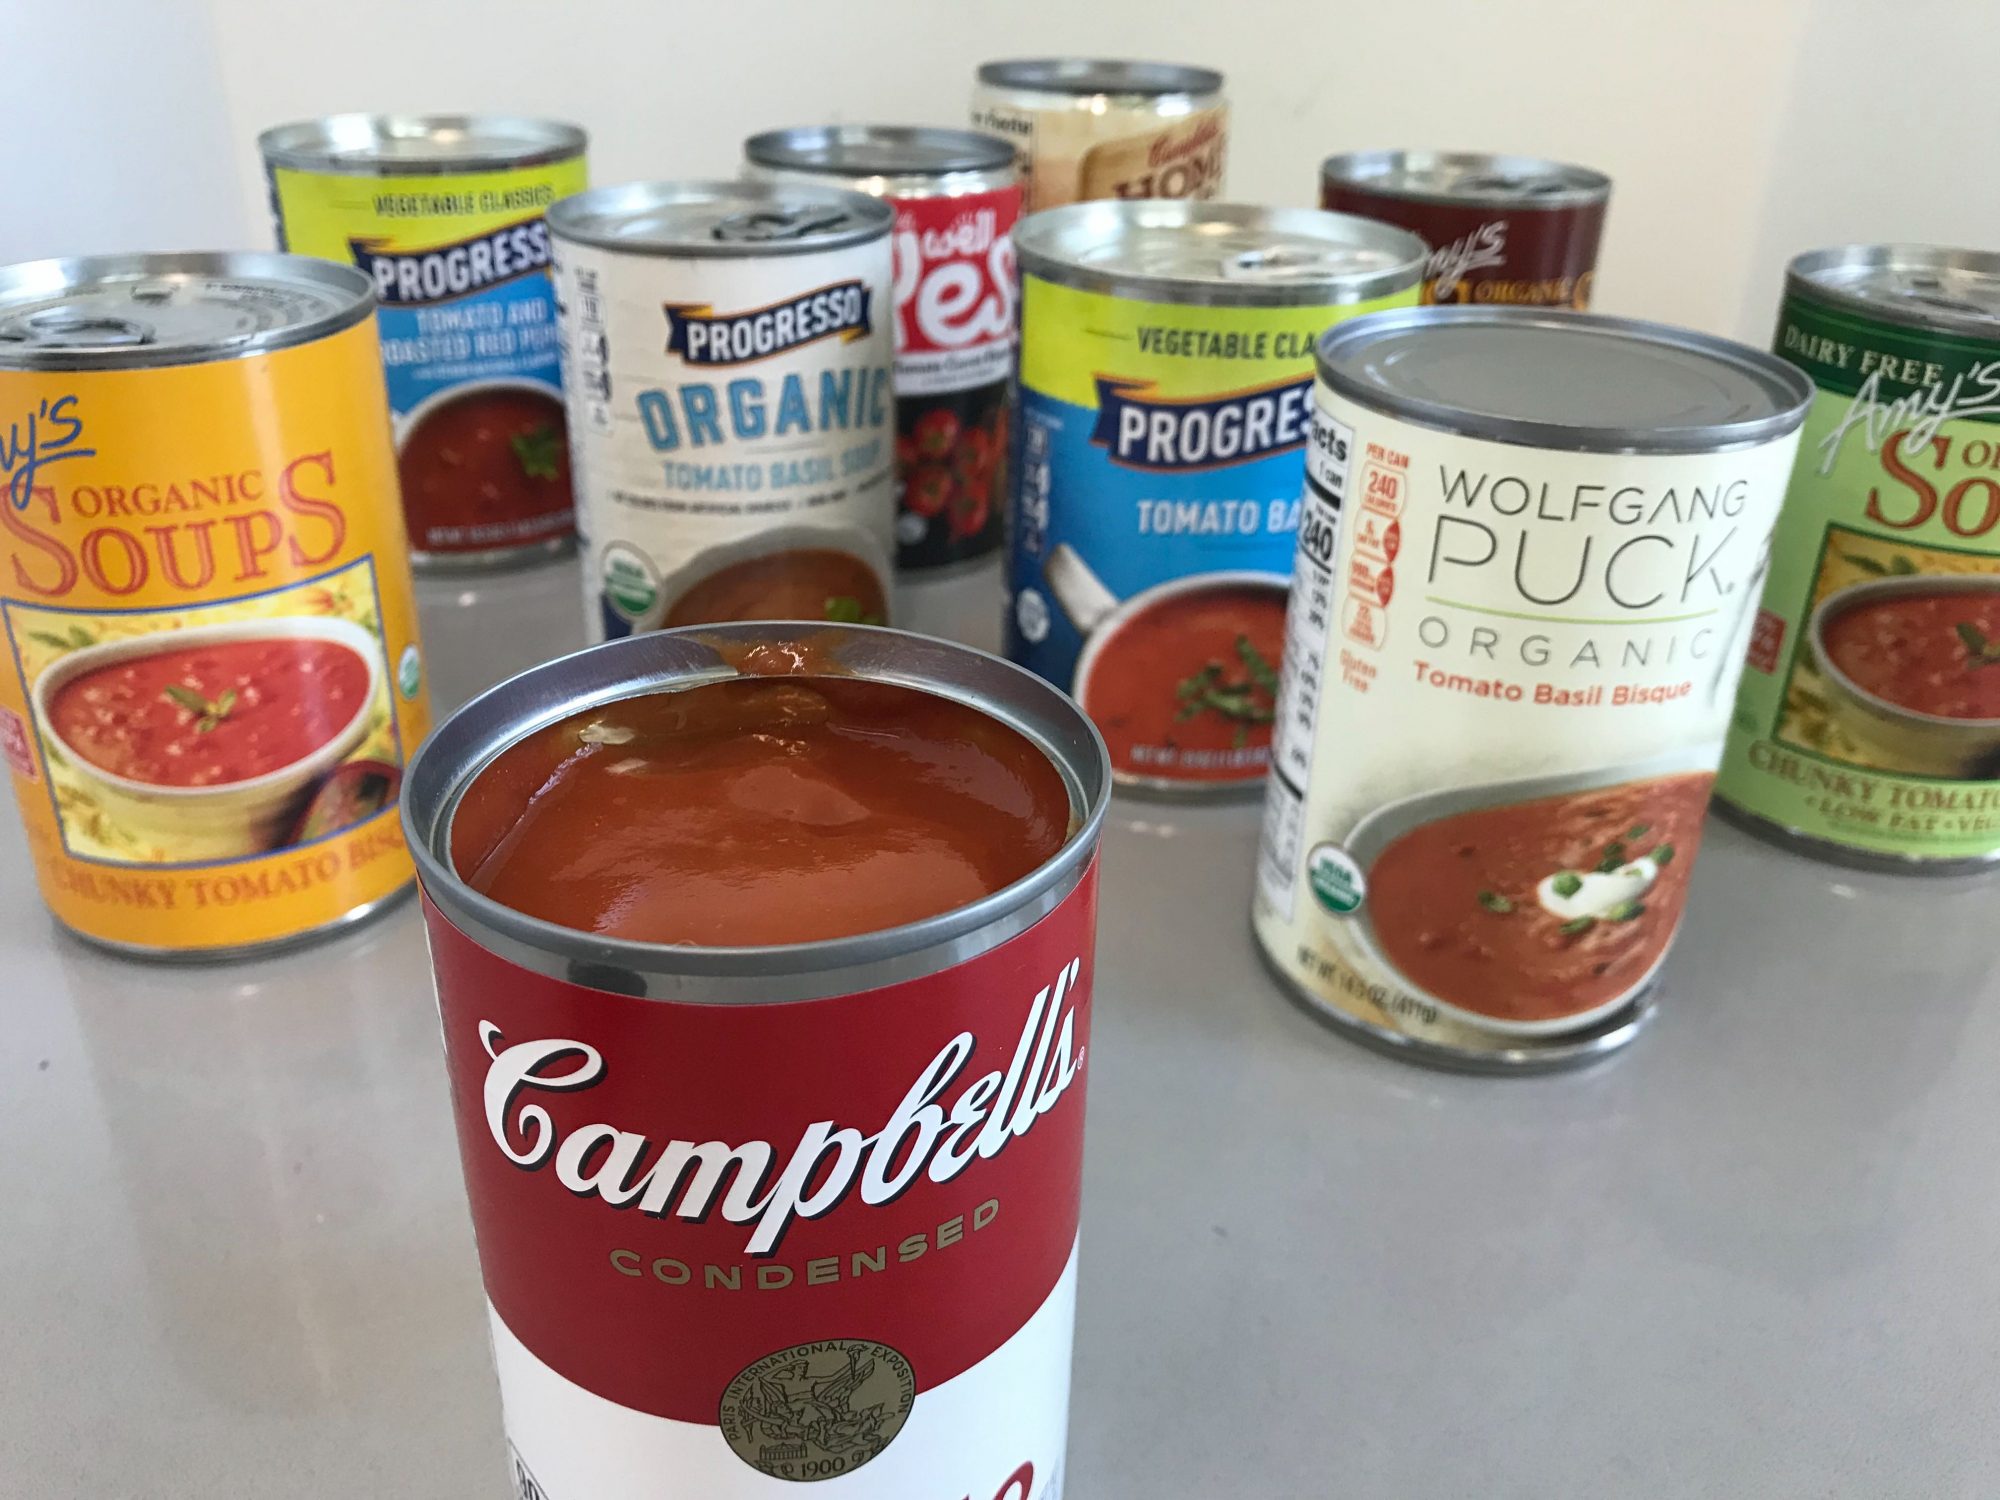 We Tried 10 Canned Tomato Soups and This Was the Best